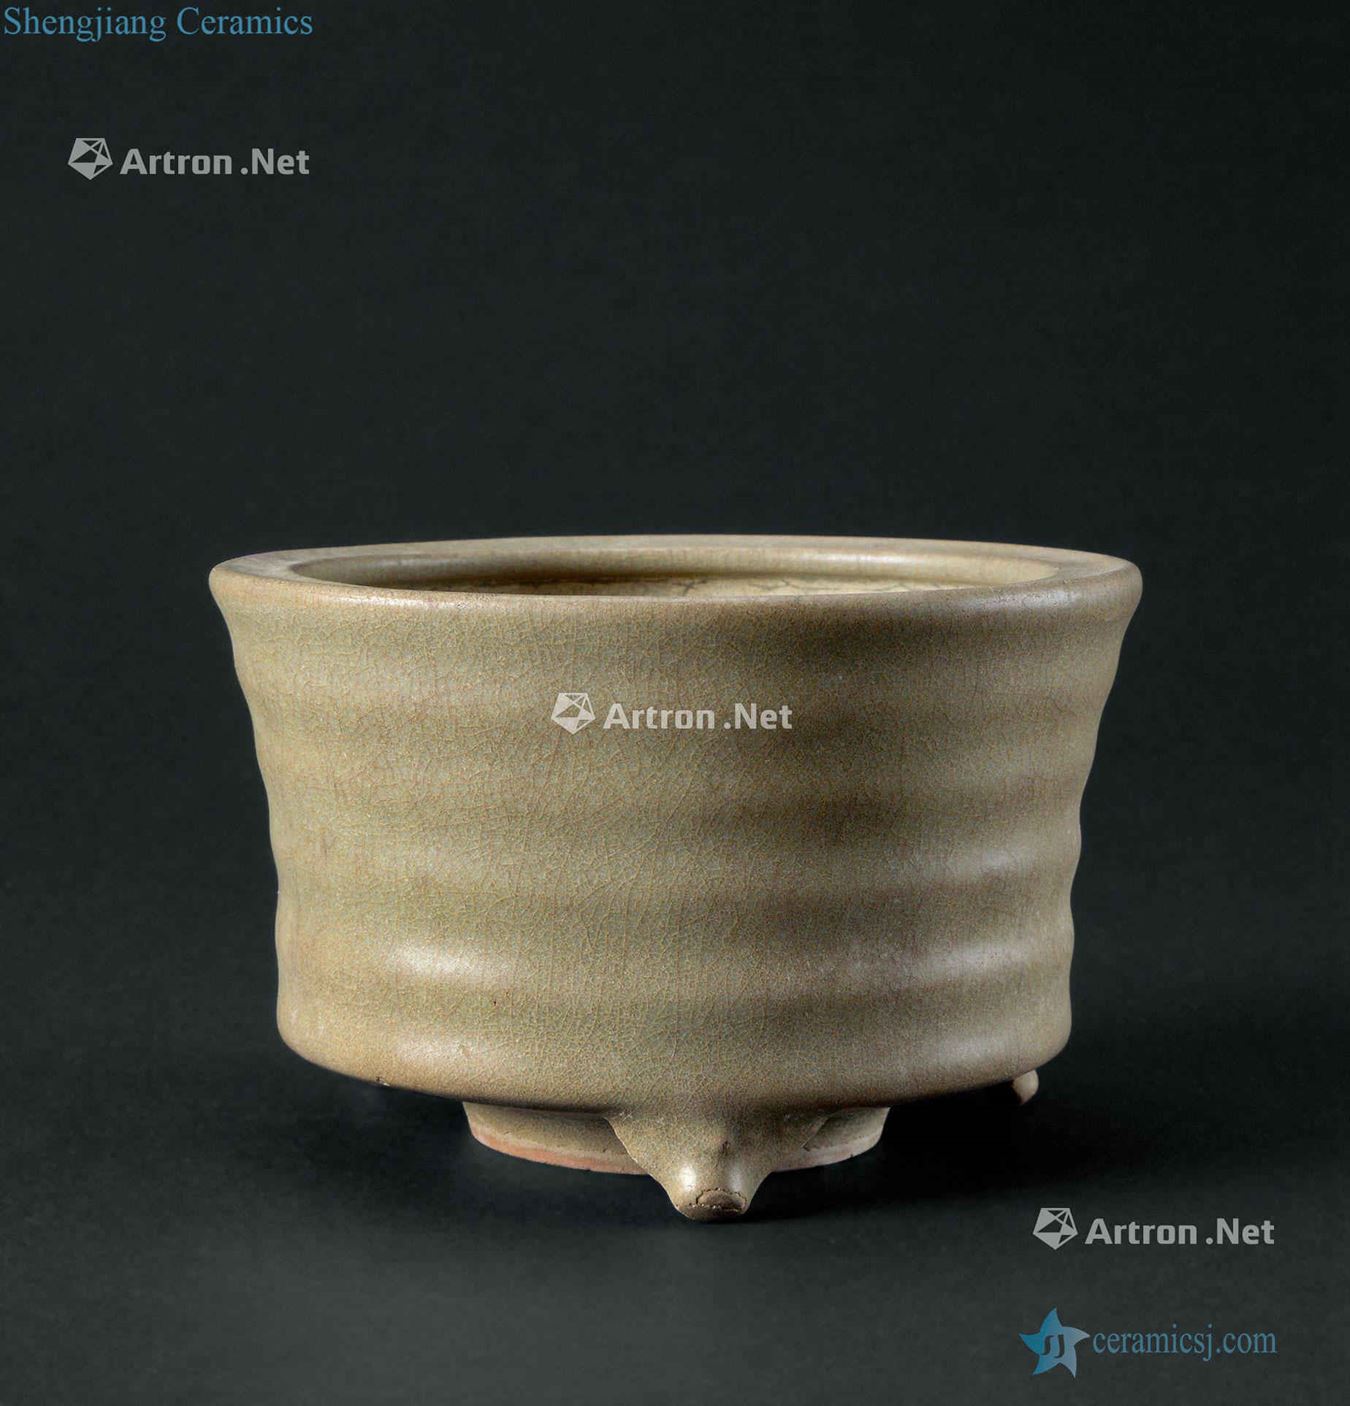 The southern song dynasty (1115-1234), longquan celadon string lines three-legged censer